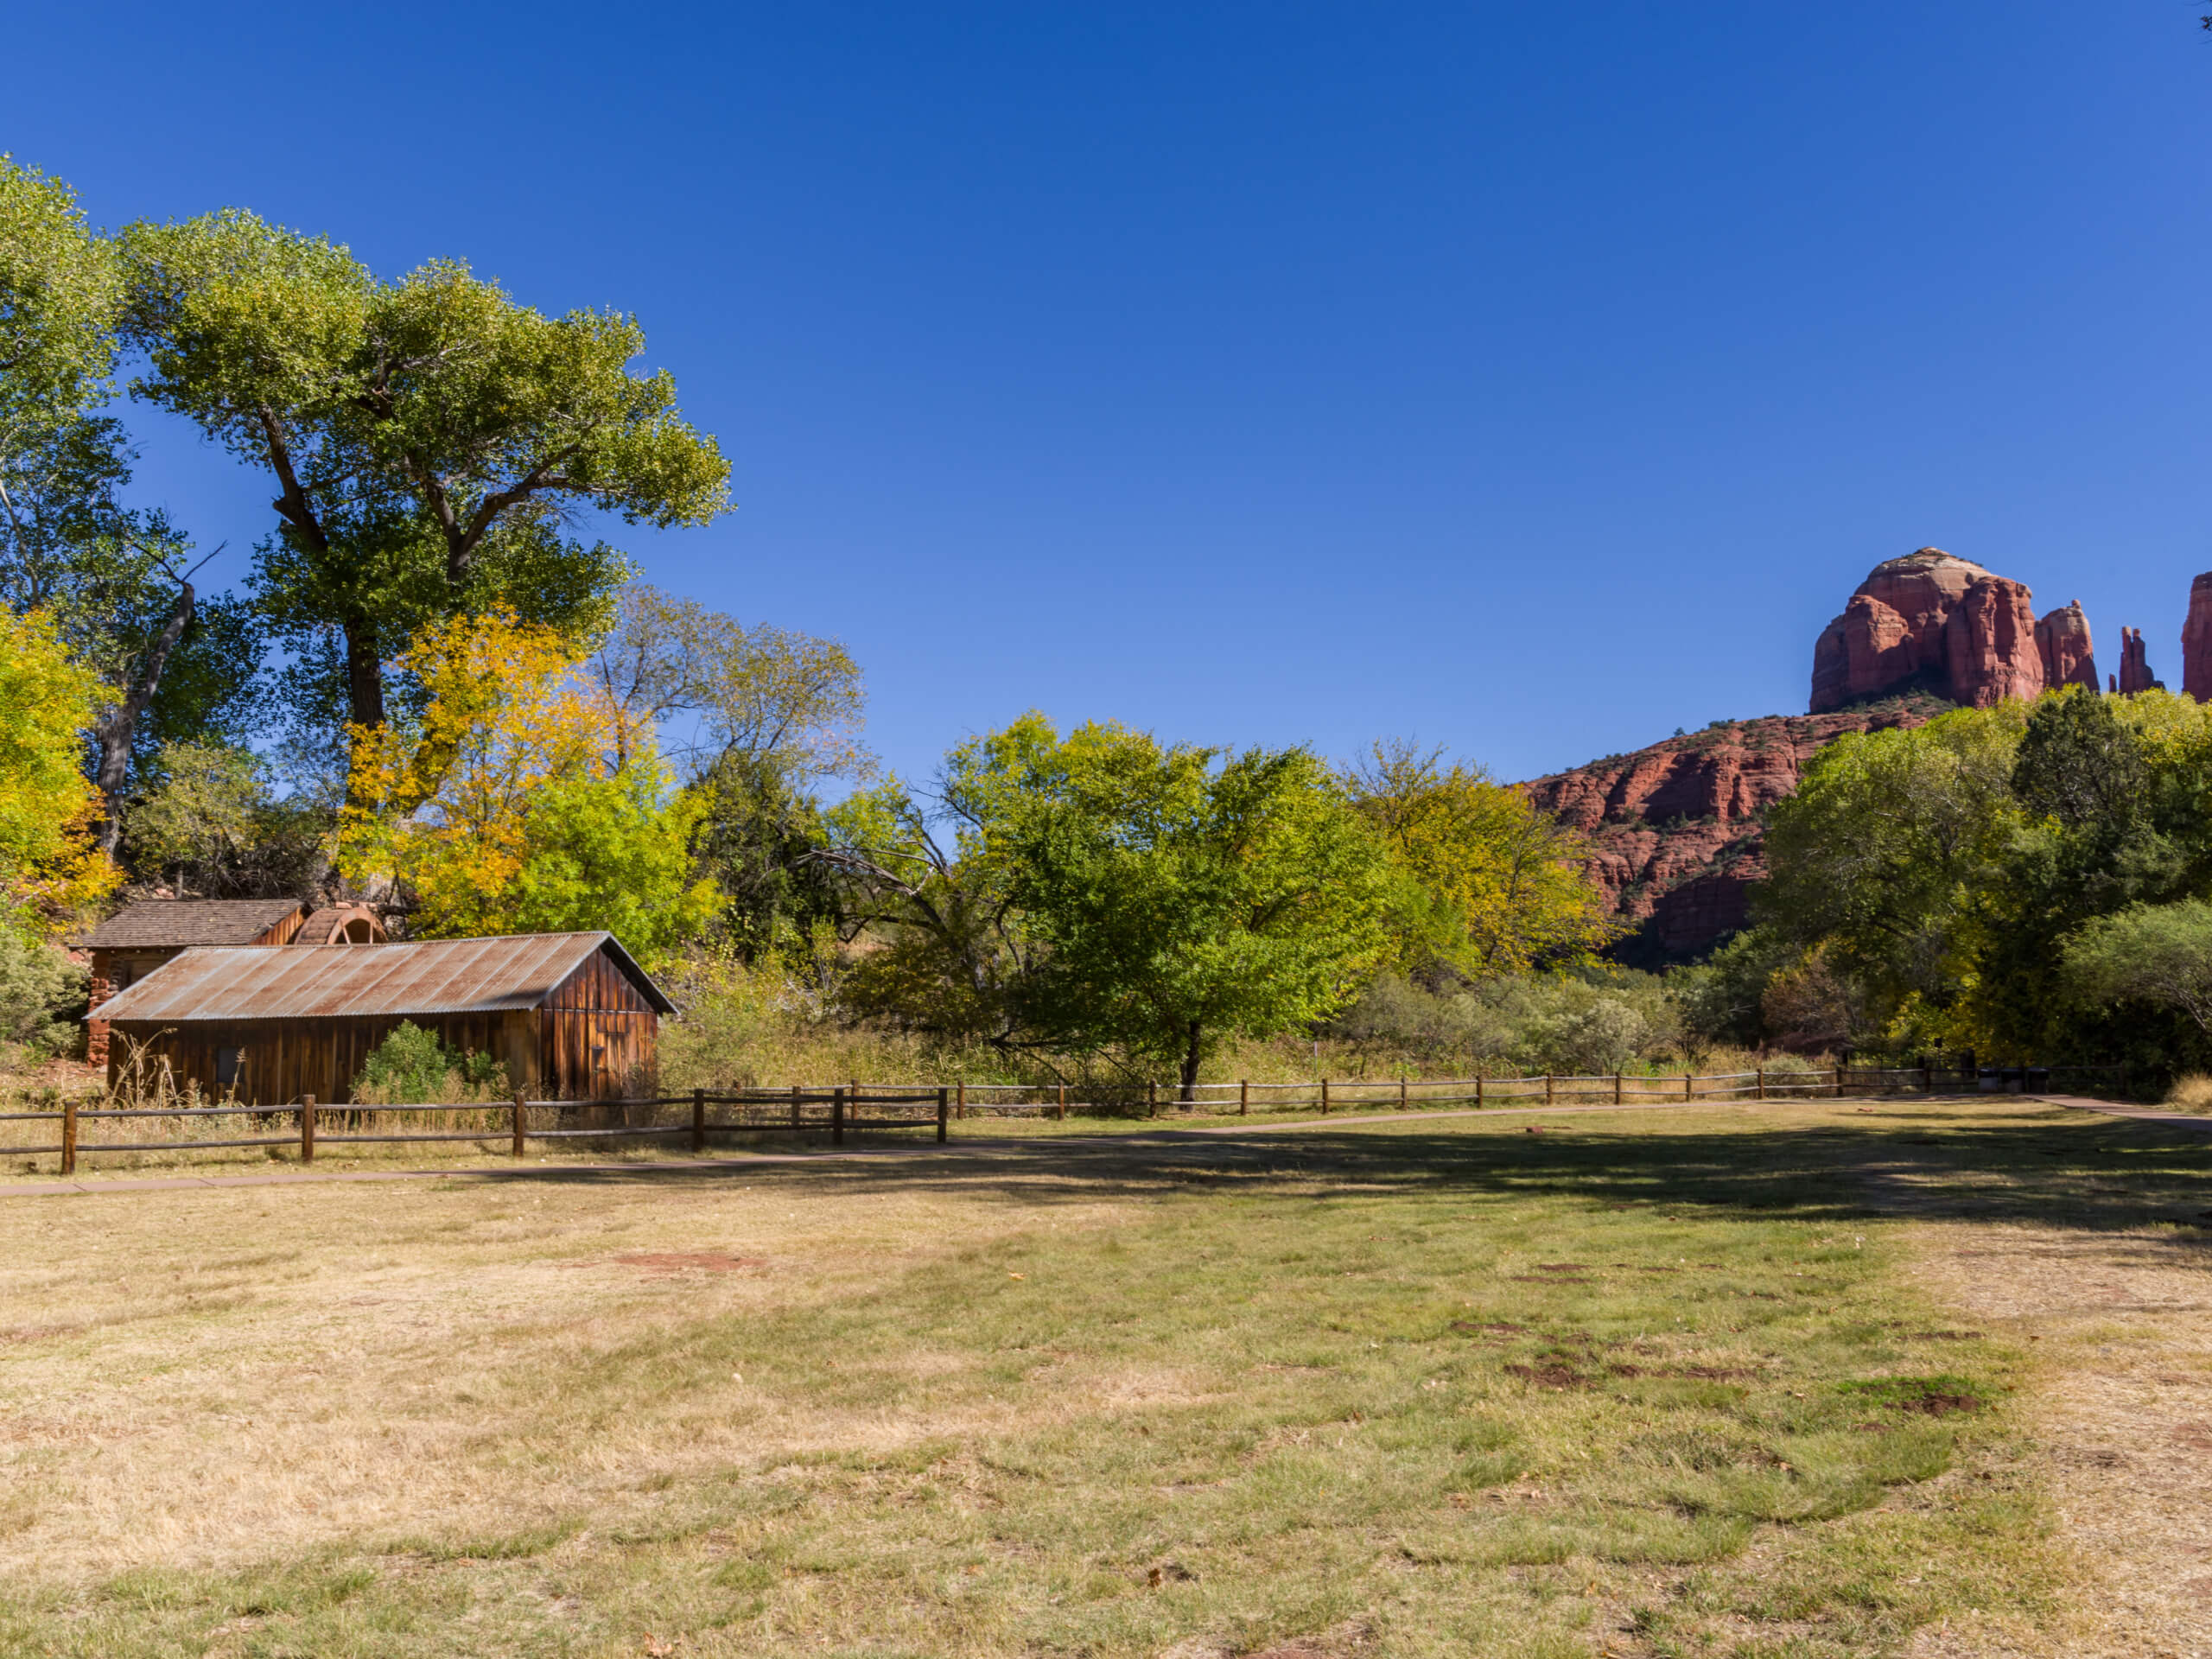 Crescent Moon Ranch to Red Rock Crossing